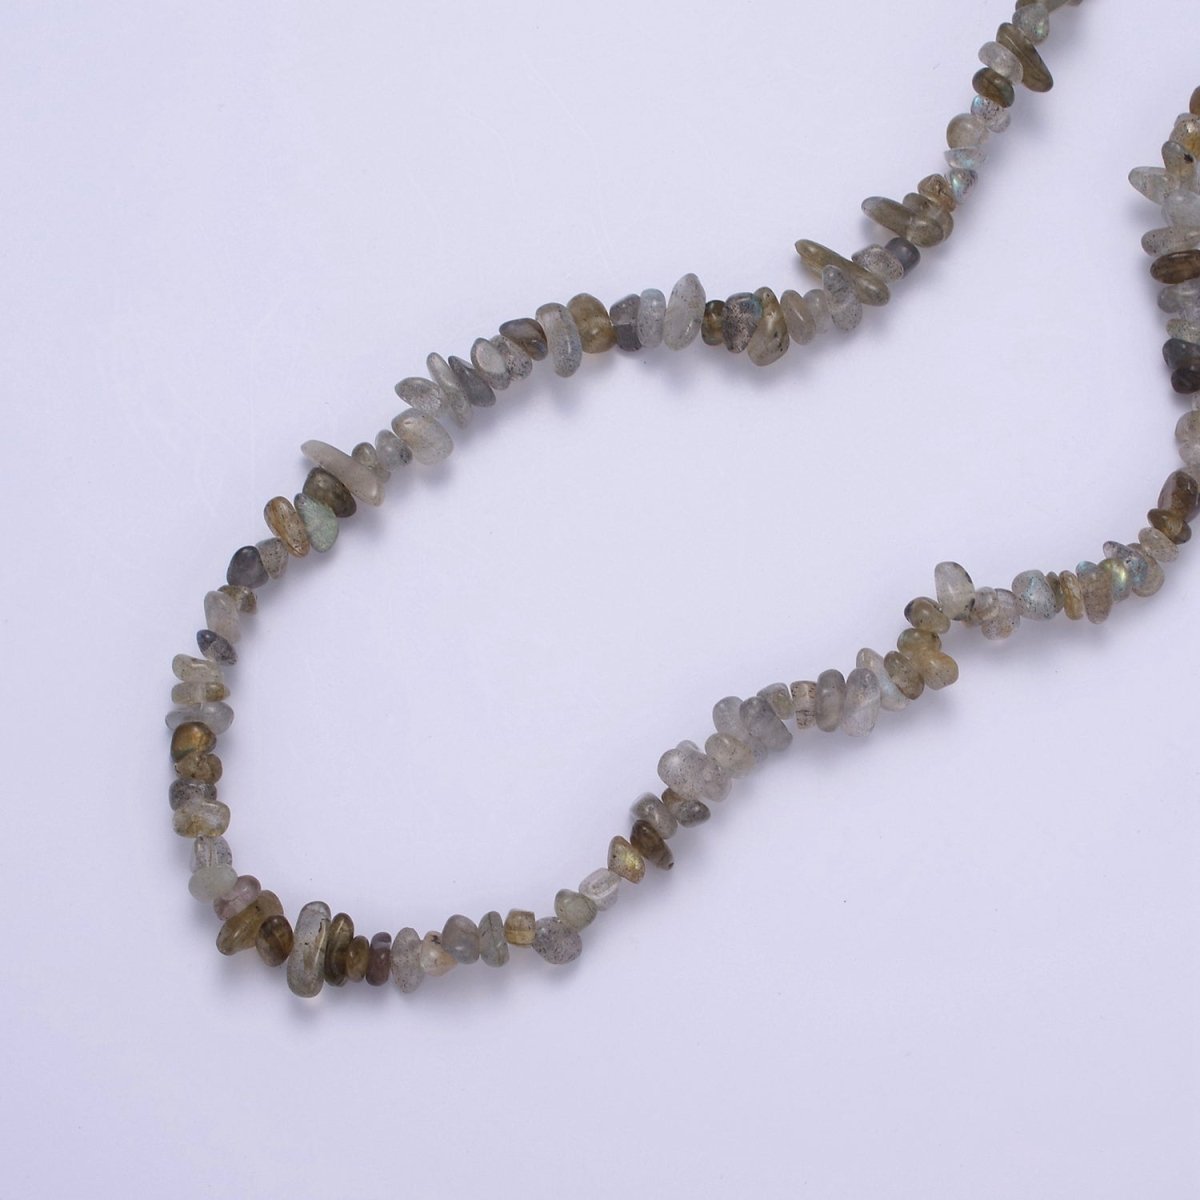 17.5 Inch Natural Dark Labradorite Crystal Chip Stone Bead Necklace with 2" Extender | WA-642 Clearance Pricing - DLUXCA